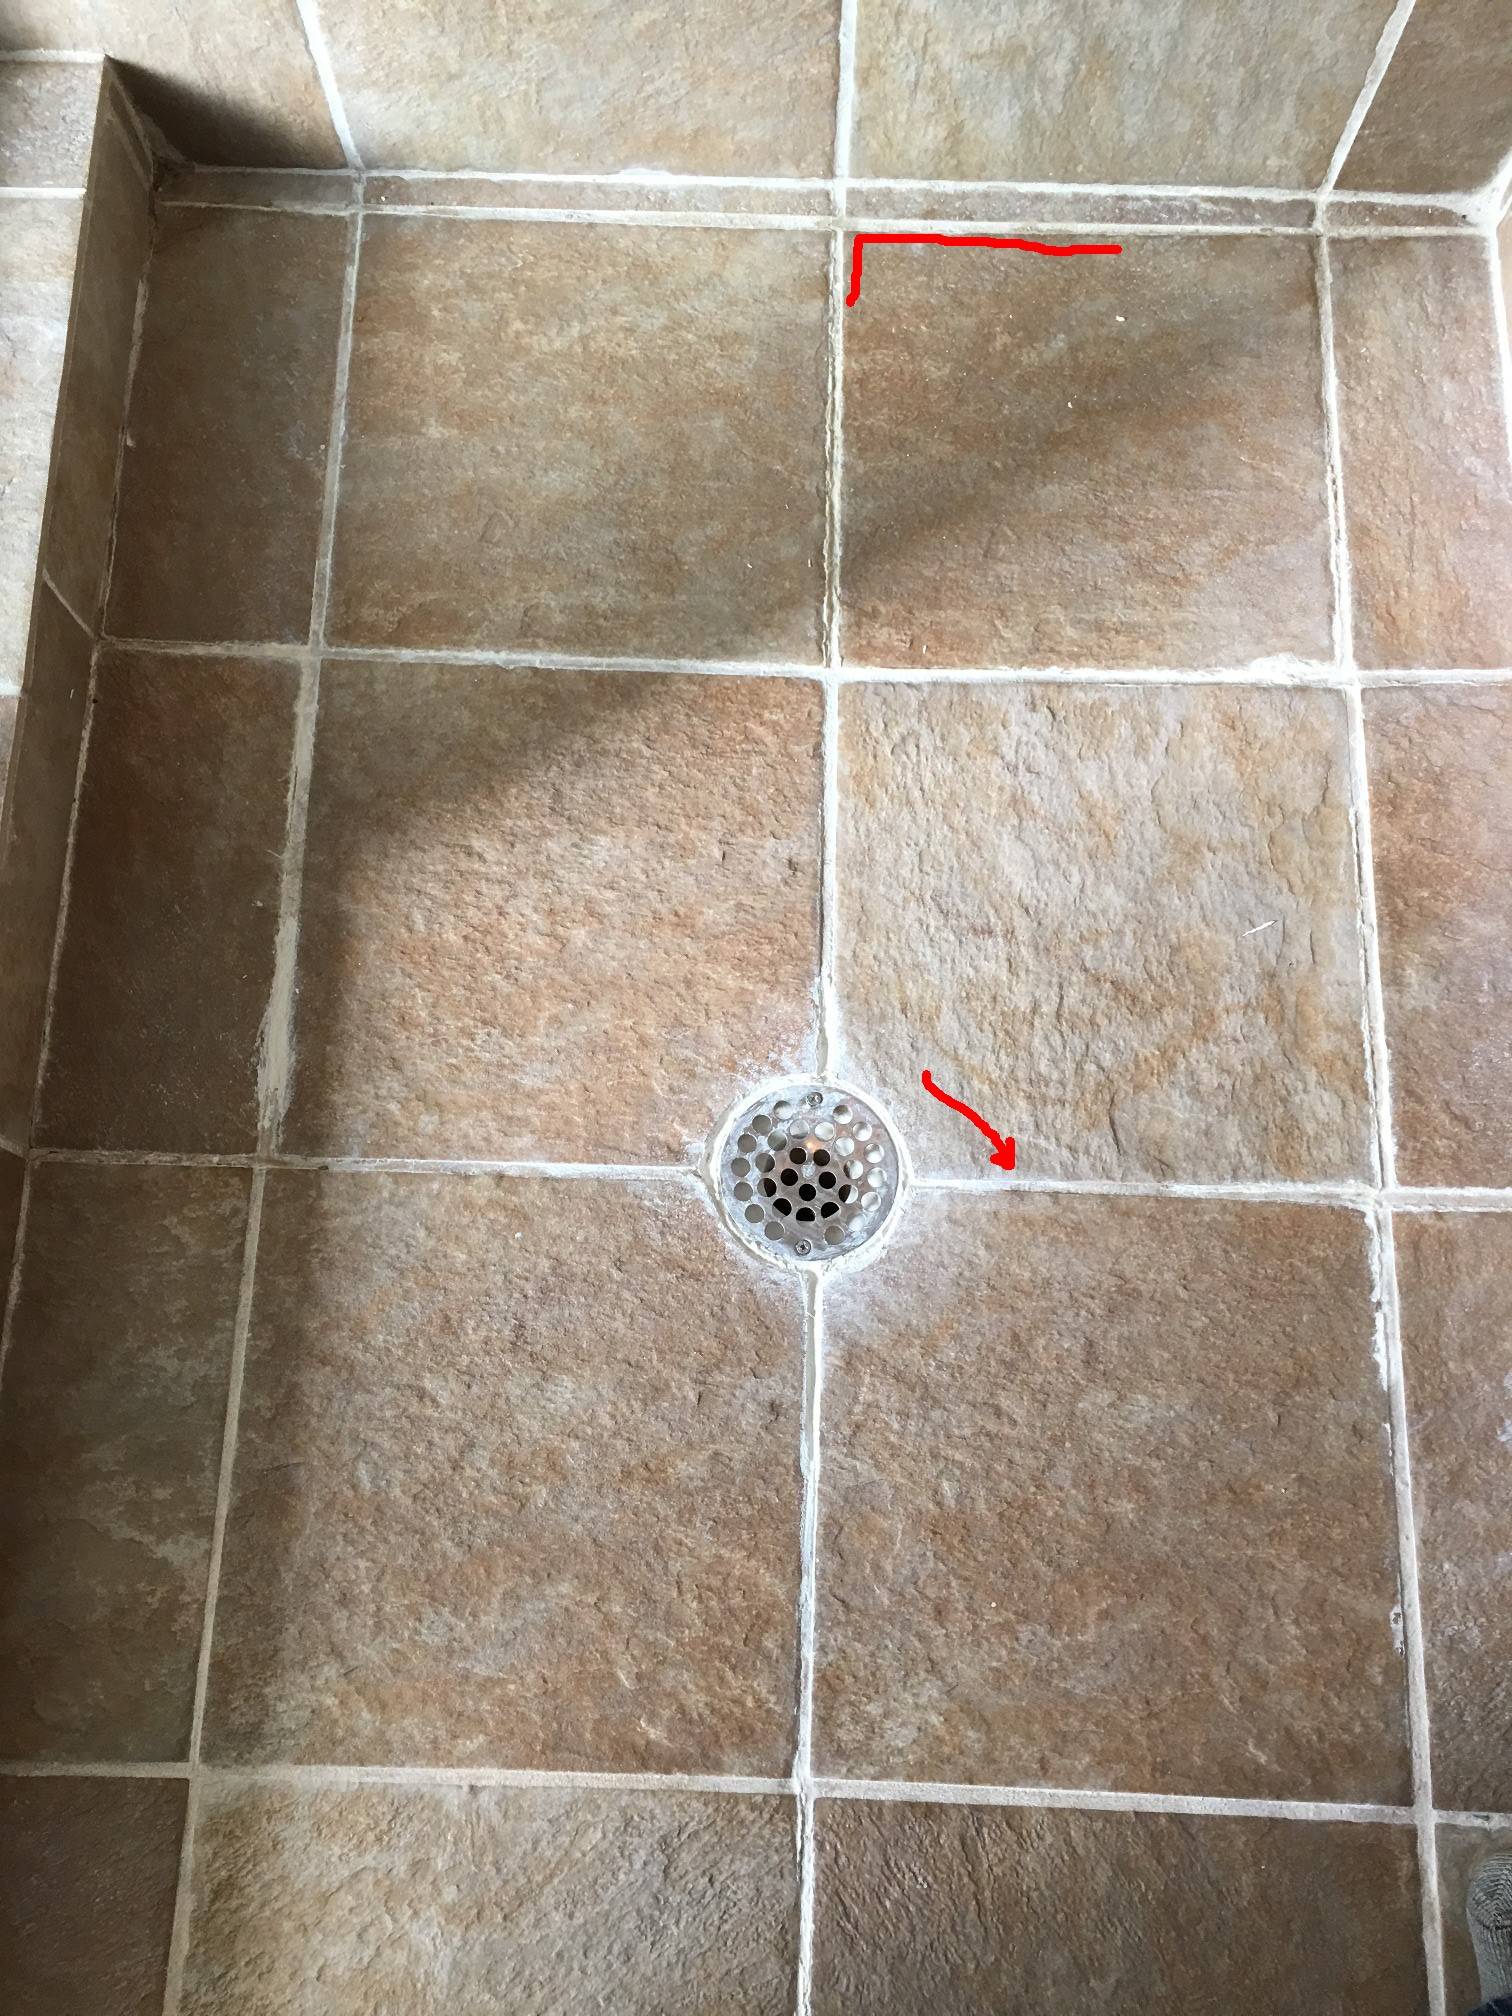 how to dry out water under tiles